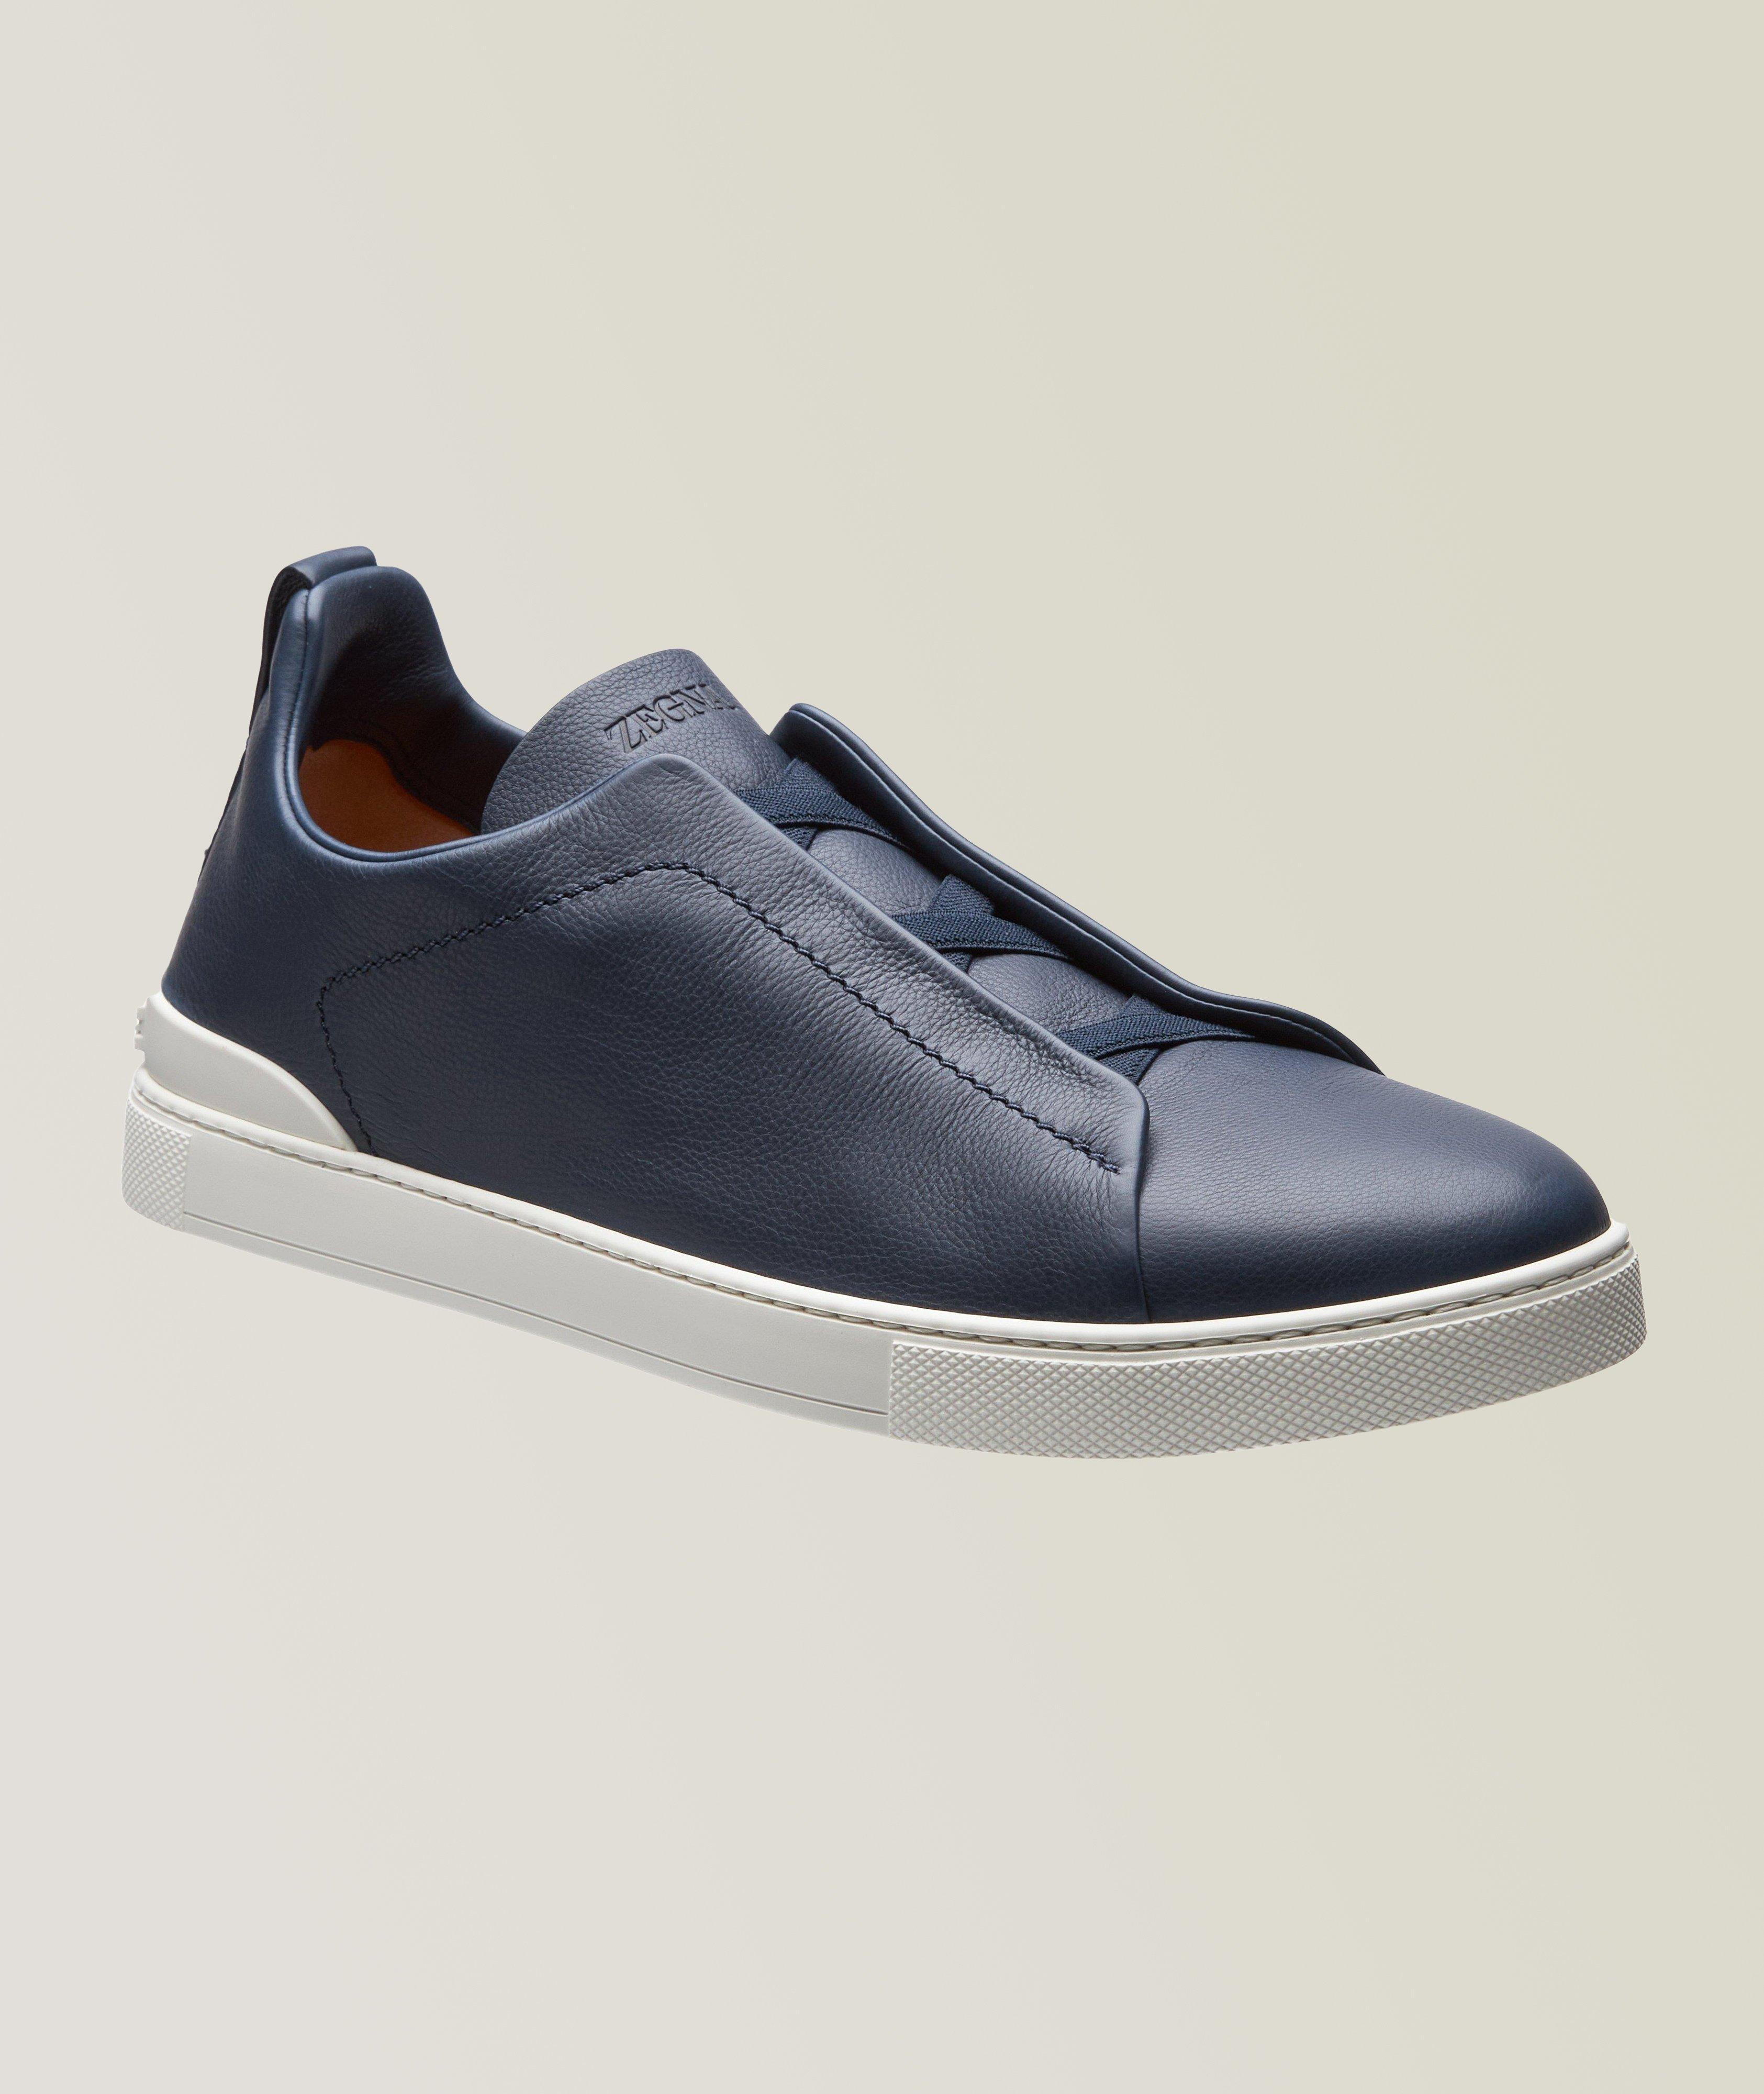 Triple Stitch Cashmere & Leather Slip-On Sneakers image 0